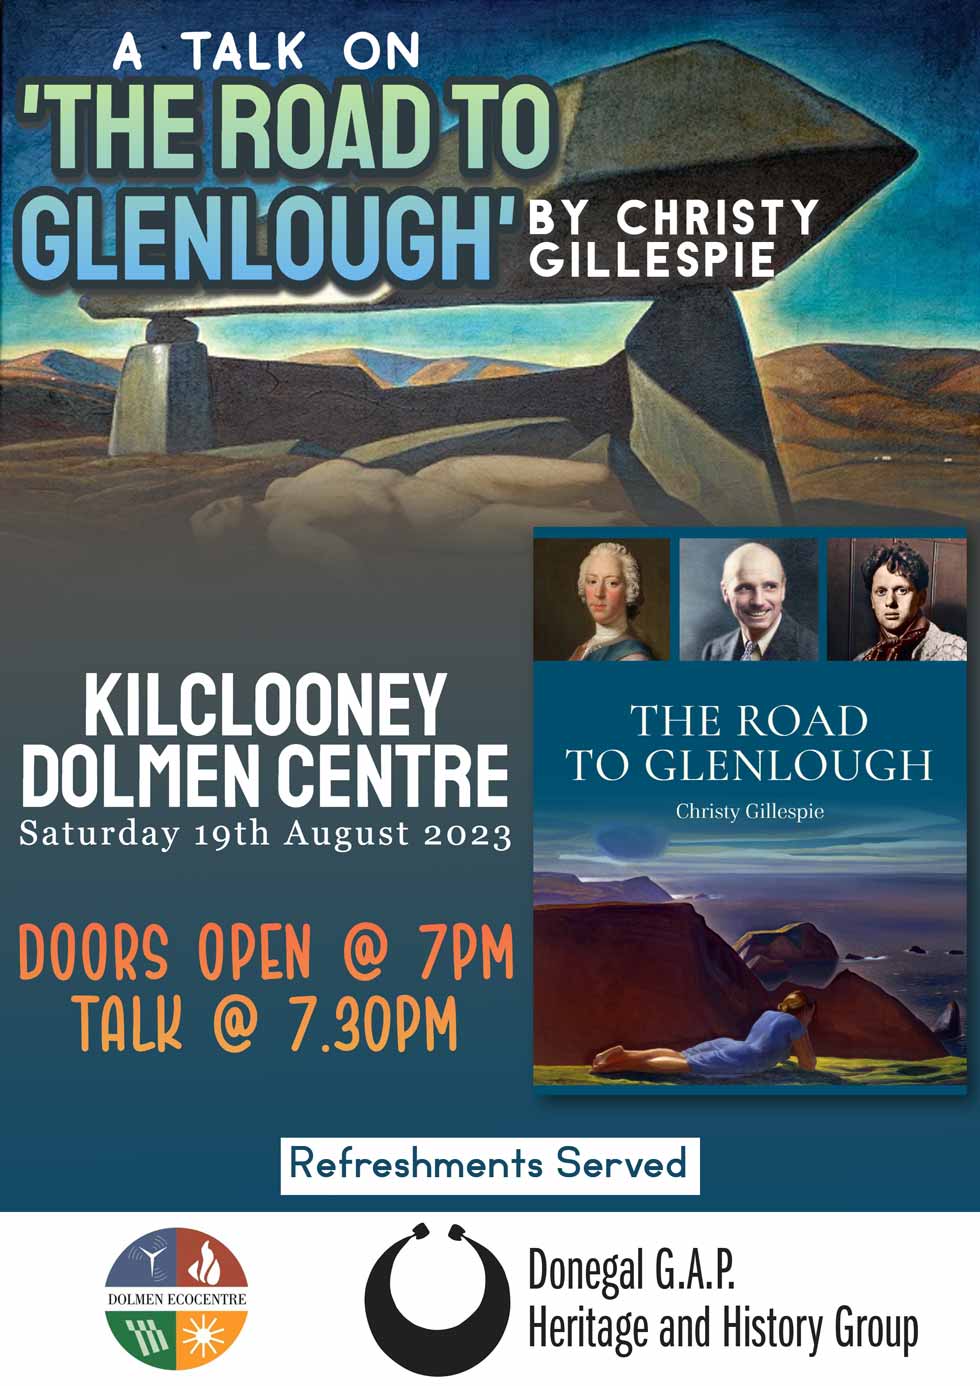 A talk on The Road to Glenlough